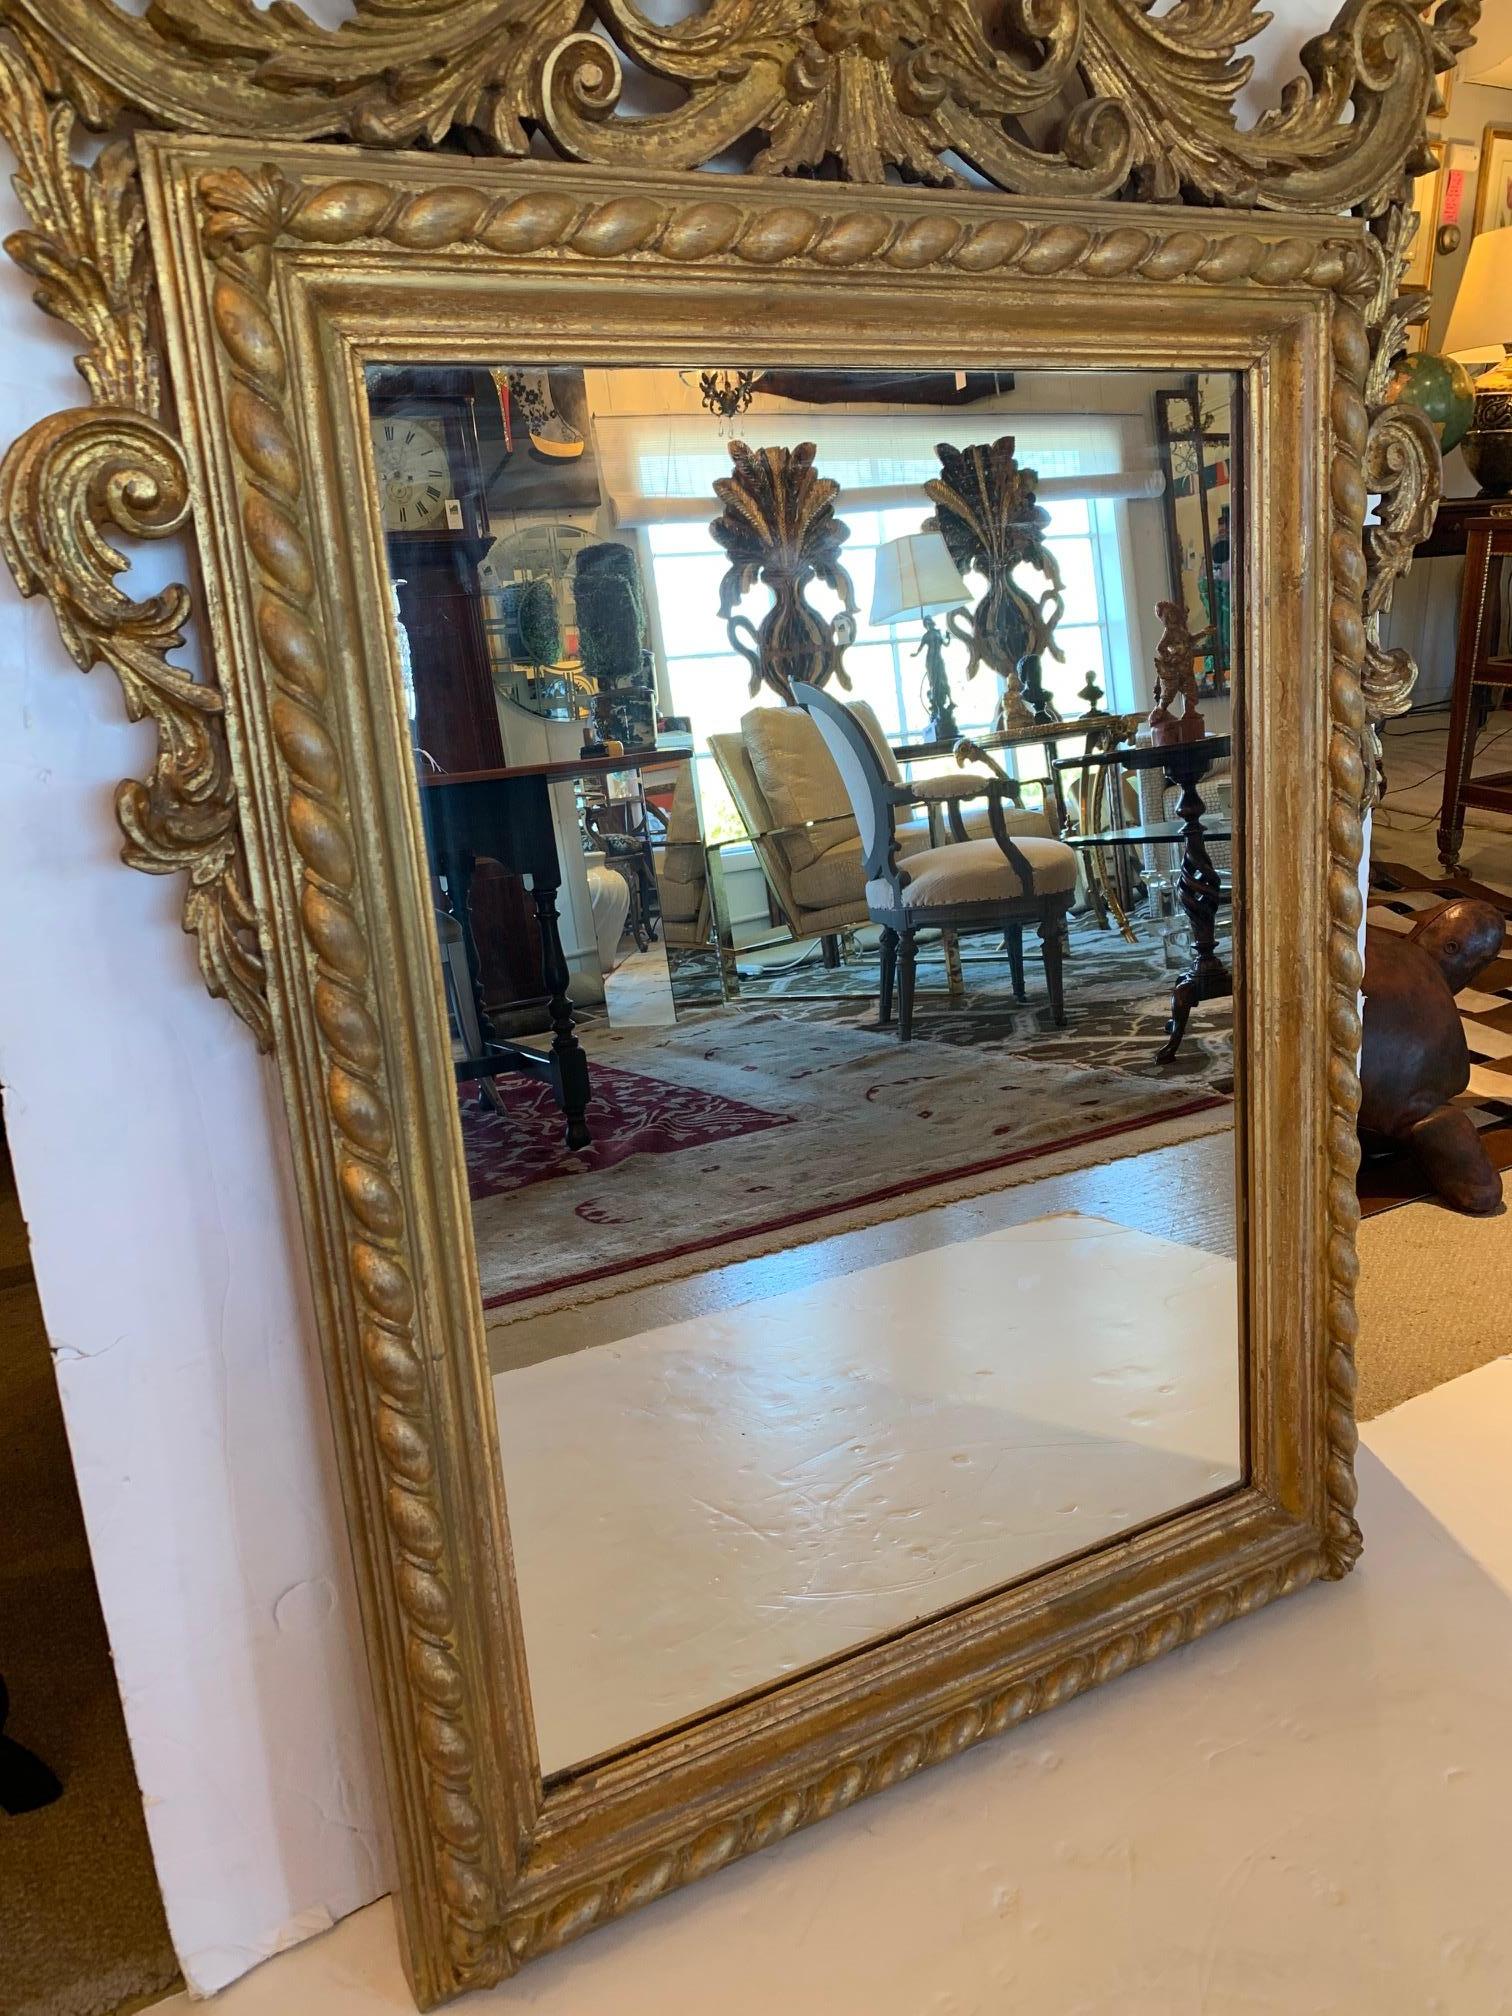 Ornately carved giltwood wall mirror from Italy having particularly lovely curlicues and flourishes around the top.